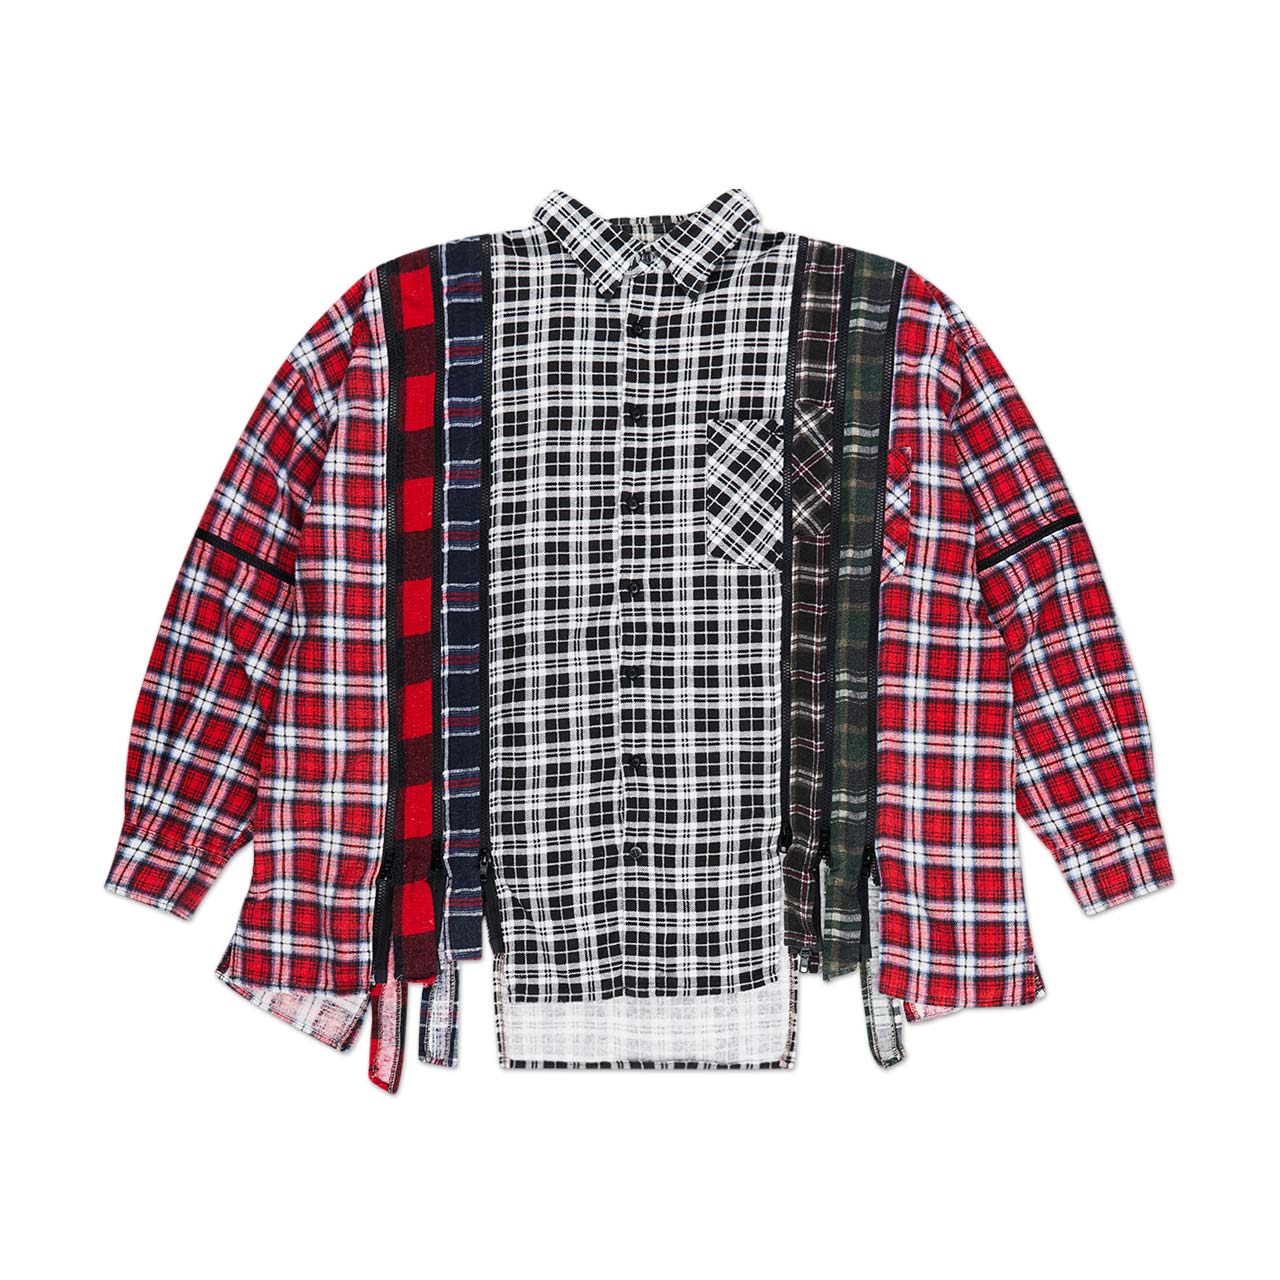 rebuild by needles 7 cuts zipped flannel shirt